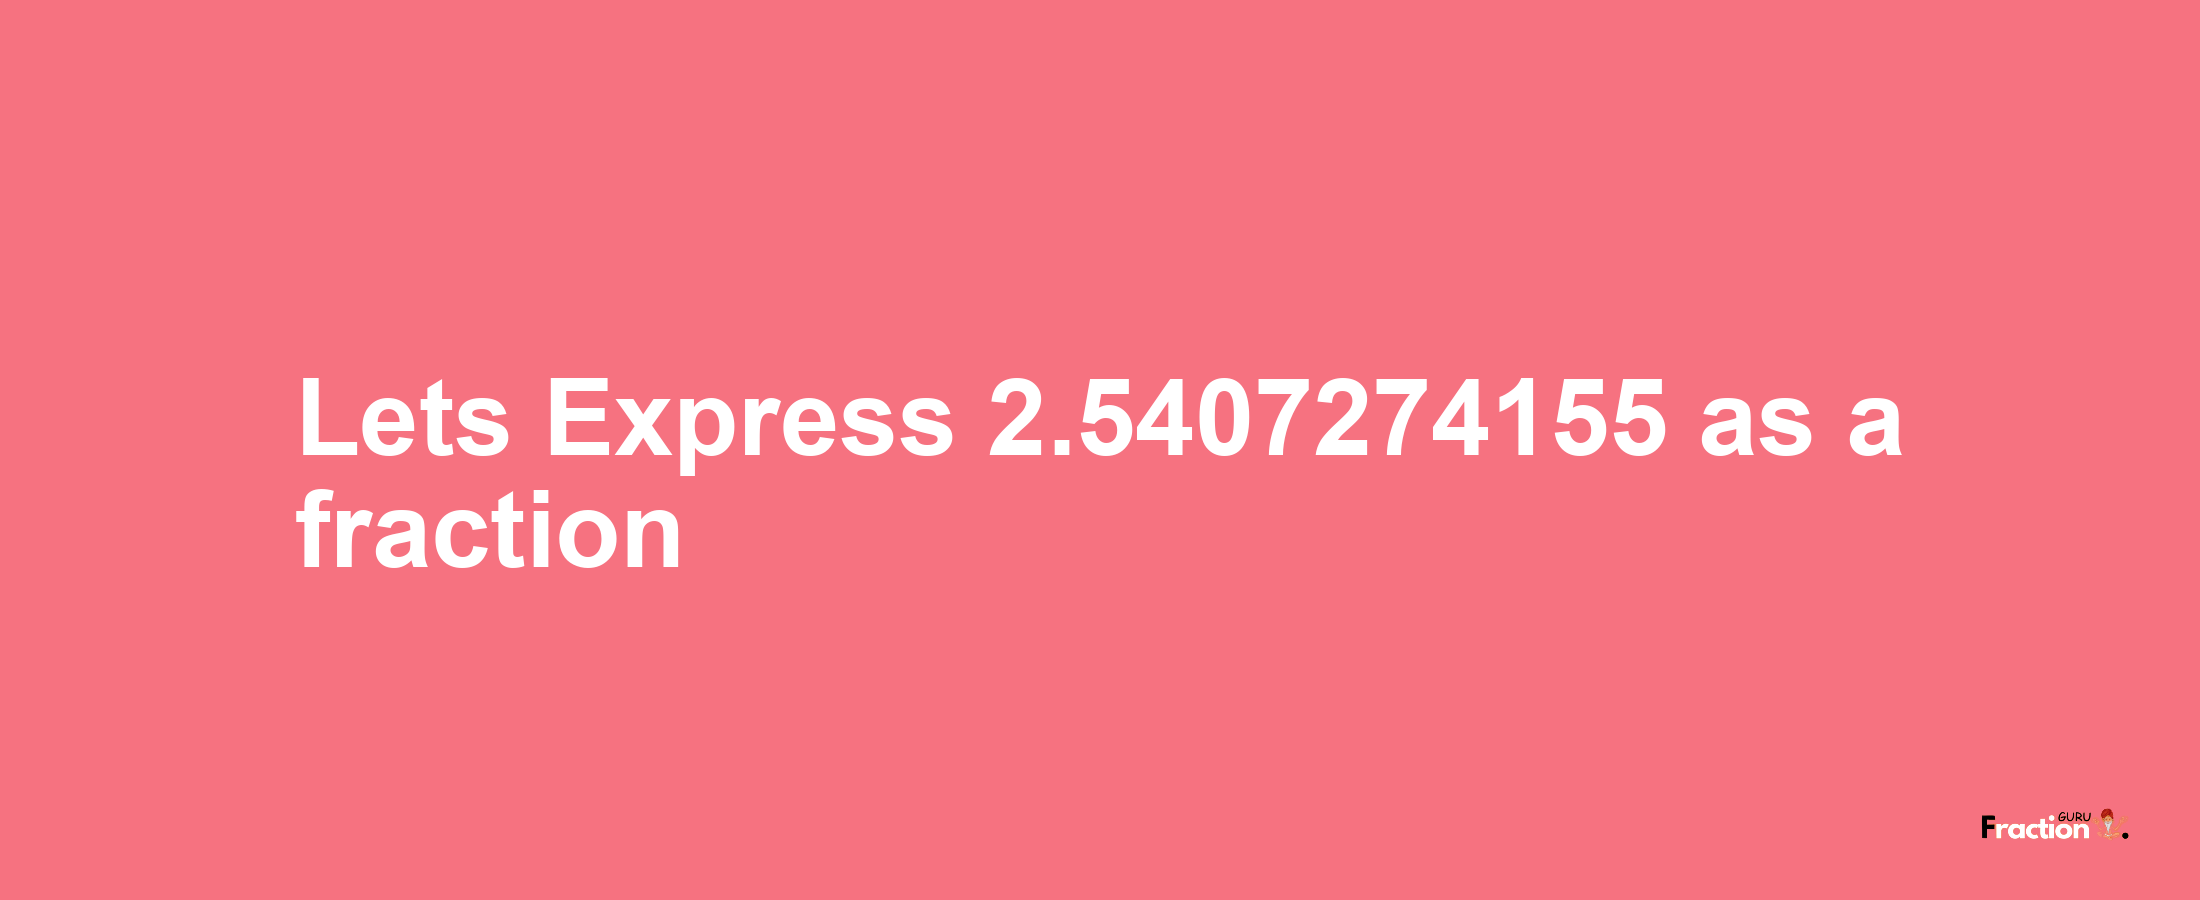 Lets Express 2.5407274155 as afraction